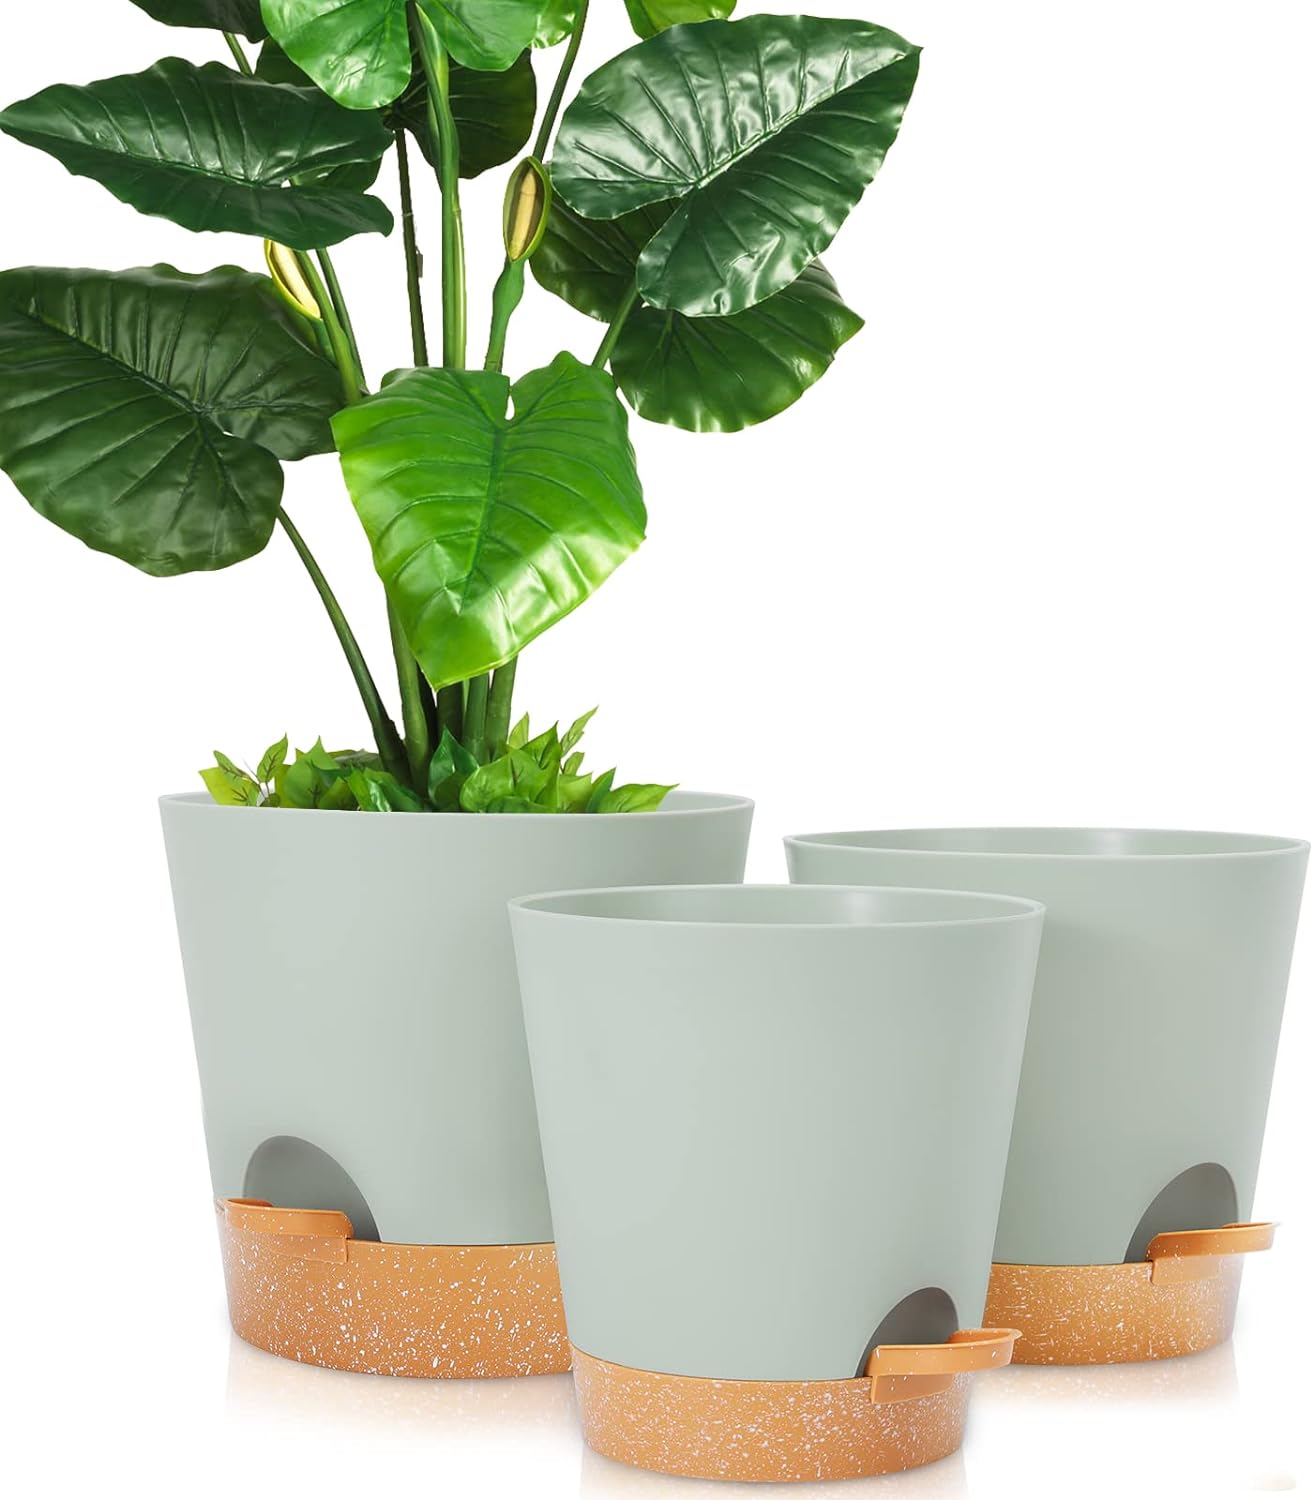 GARDIFE Planters for Indoor Plants, 9/8/7.5 Inch Self Watering Pots with Drainage Hole, Plastic Flower Pots, Plant Pots for Succulents,Snake Plant, African Violet, Flowers, Green